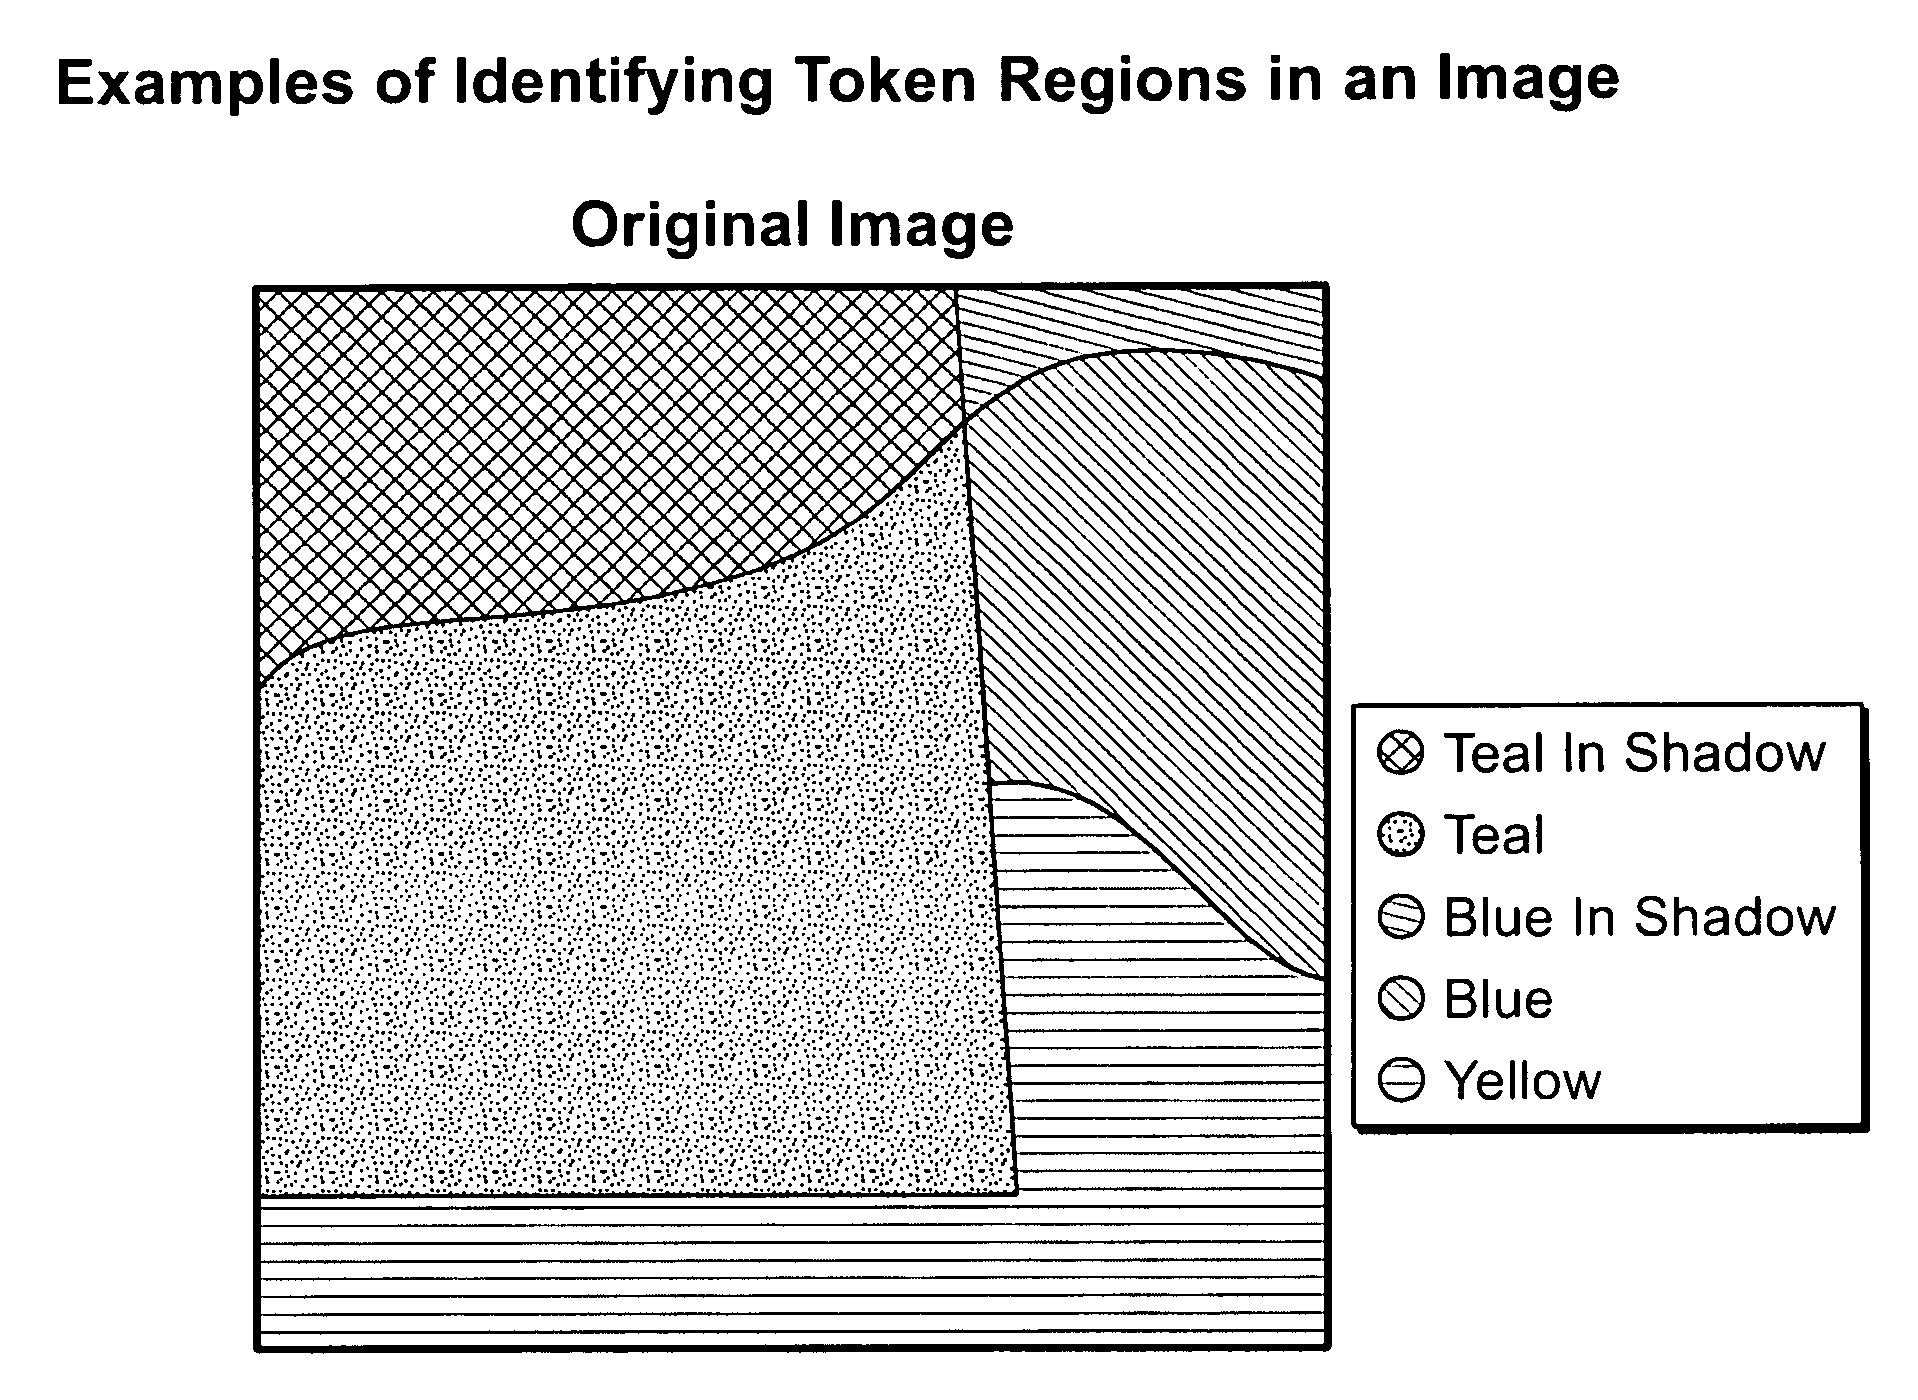 Constraint generation for use in image segregation